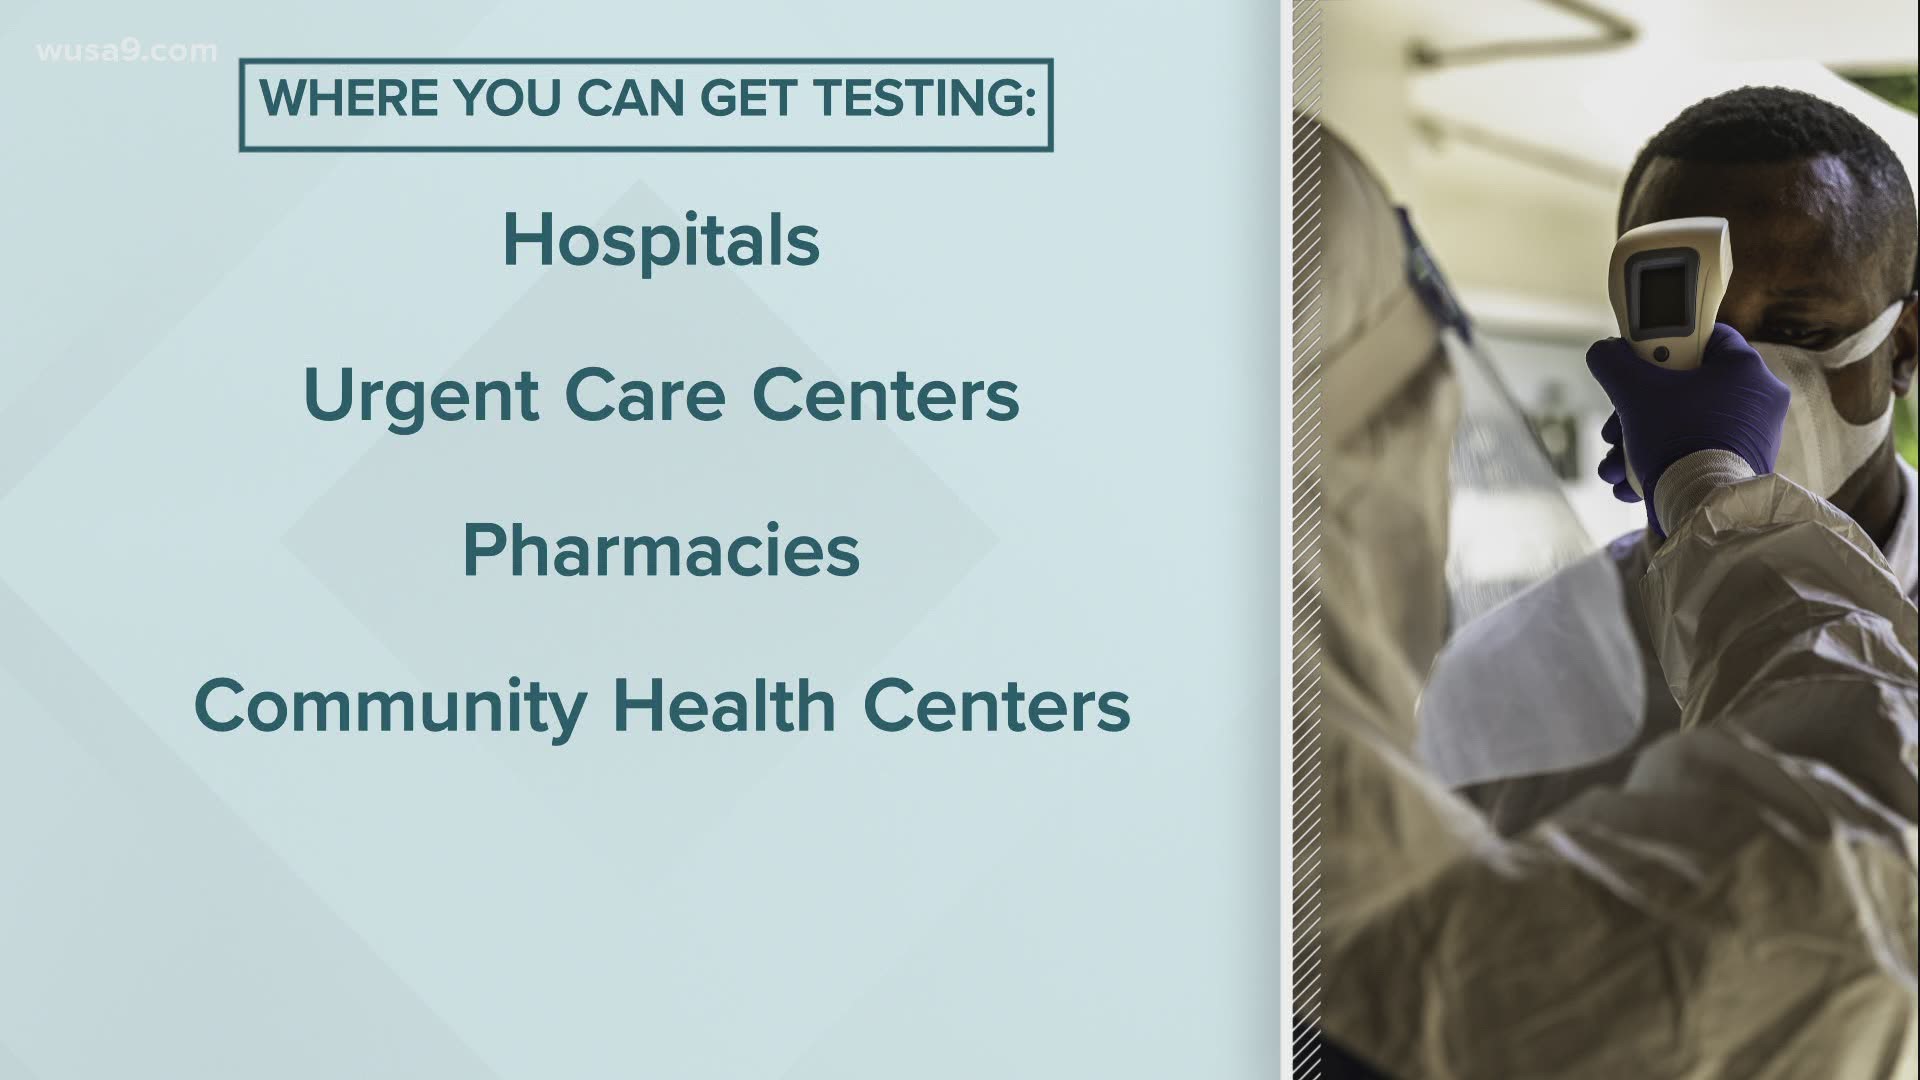 Some counties won't allow retesting at its free drive-thru testing sites unless the person has symptoms. But, there are other options.